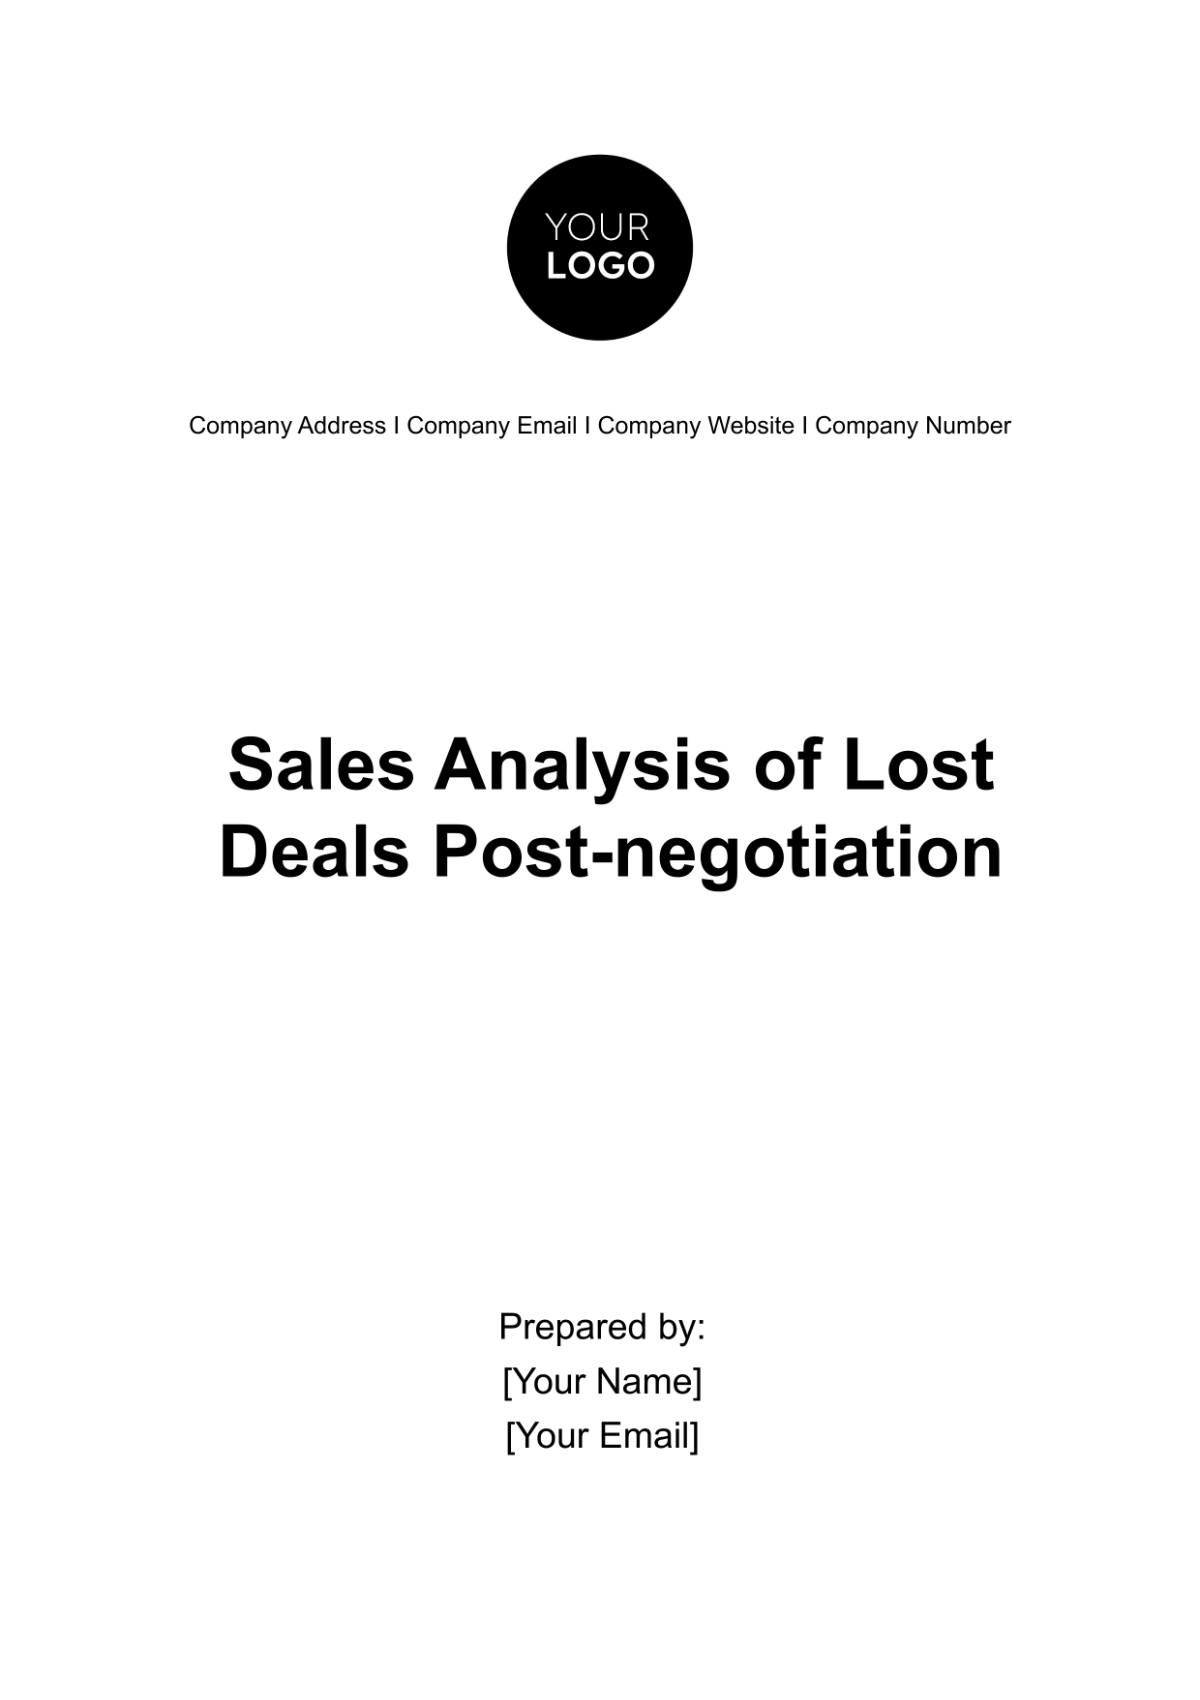 Sales Analysis of Lost Deals Post-Negotiation Template